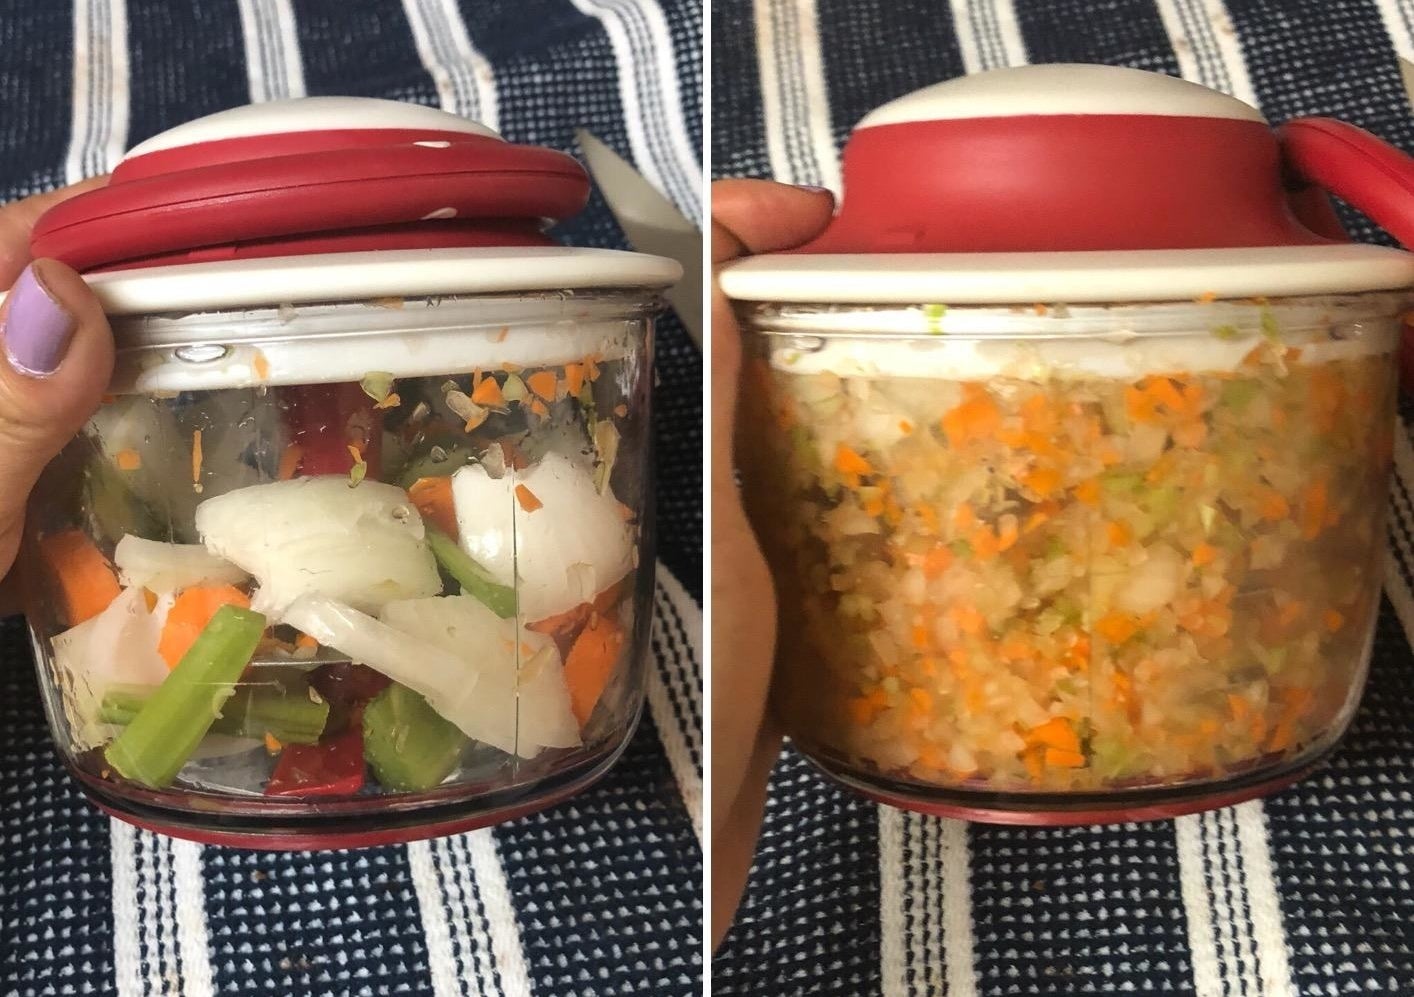 Reviewer before and after photos showing roughly chopped veggies finely minced by the chopper